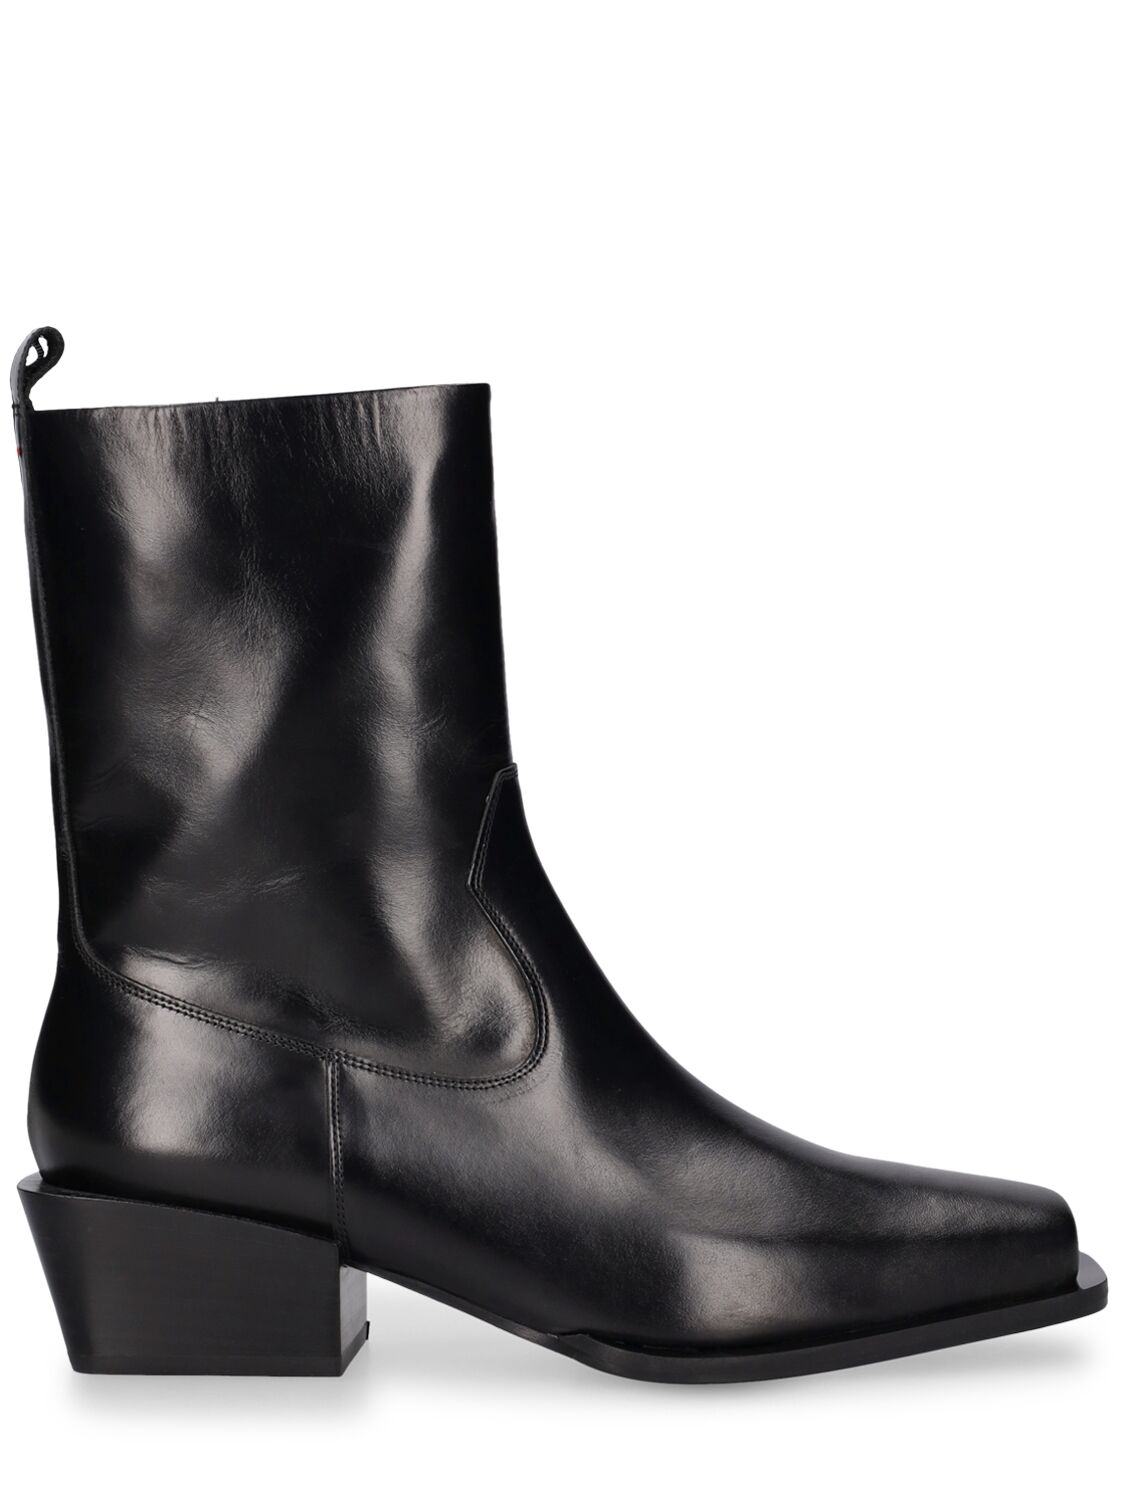 40mm Bill Leather Ankle Boots